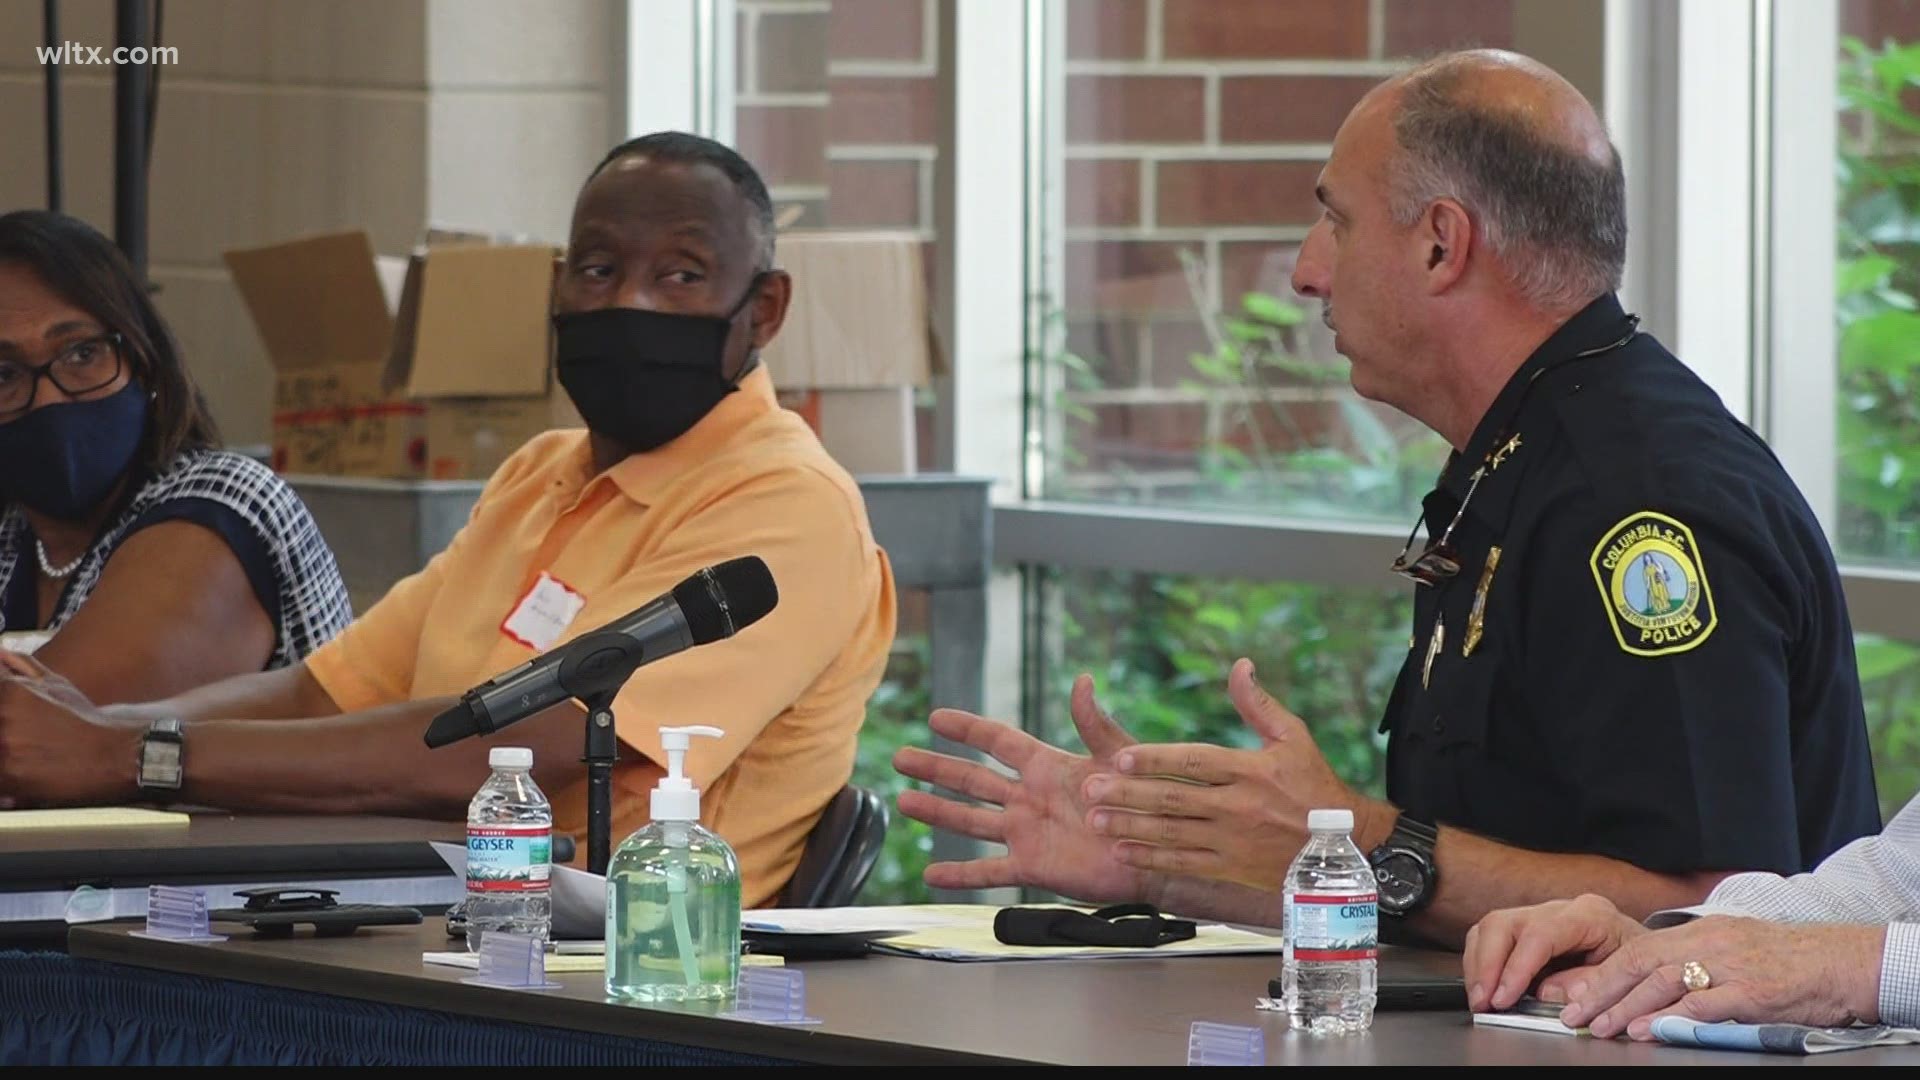 Community leaders in Columbia came together to discuss the recent increase in gun violence.